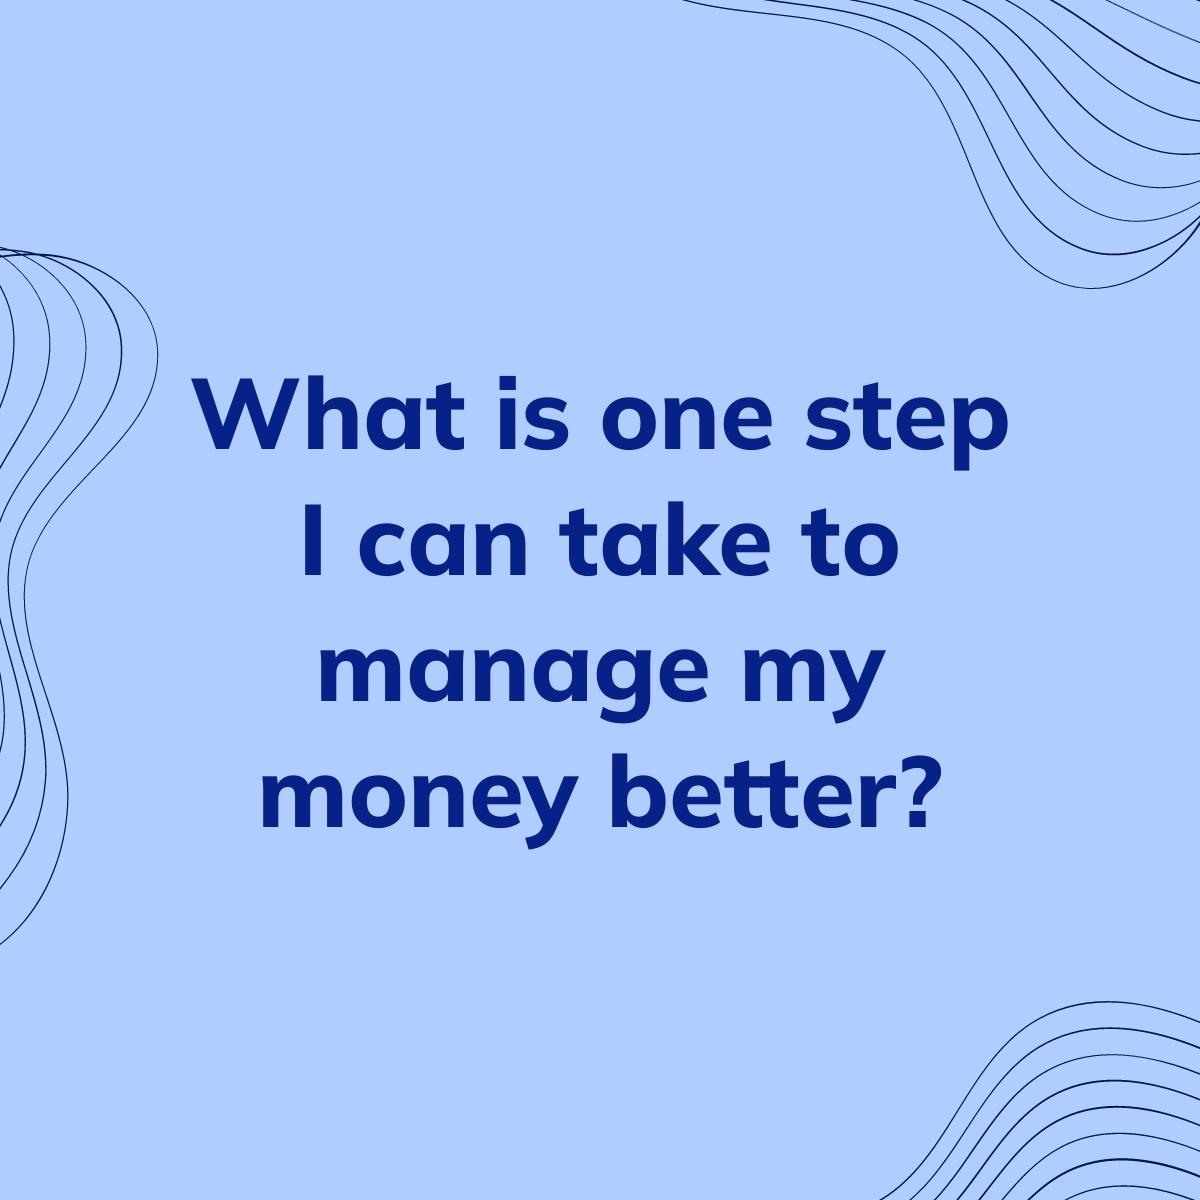 Journal Prompt: What is one step I can take to manage my money better?